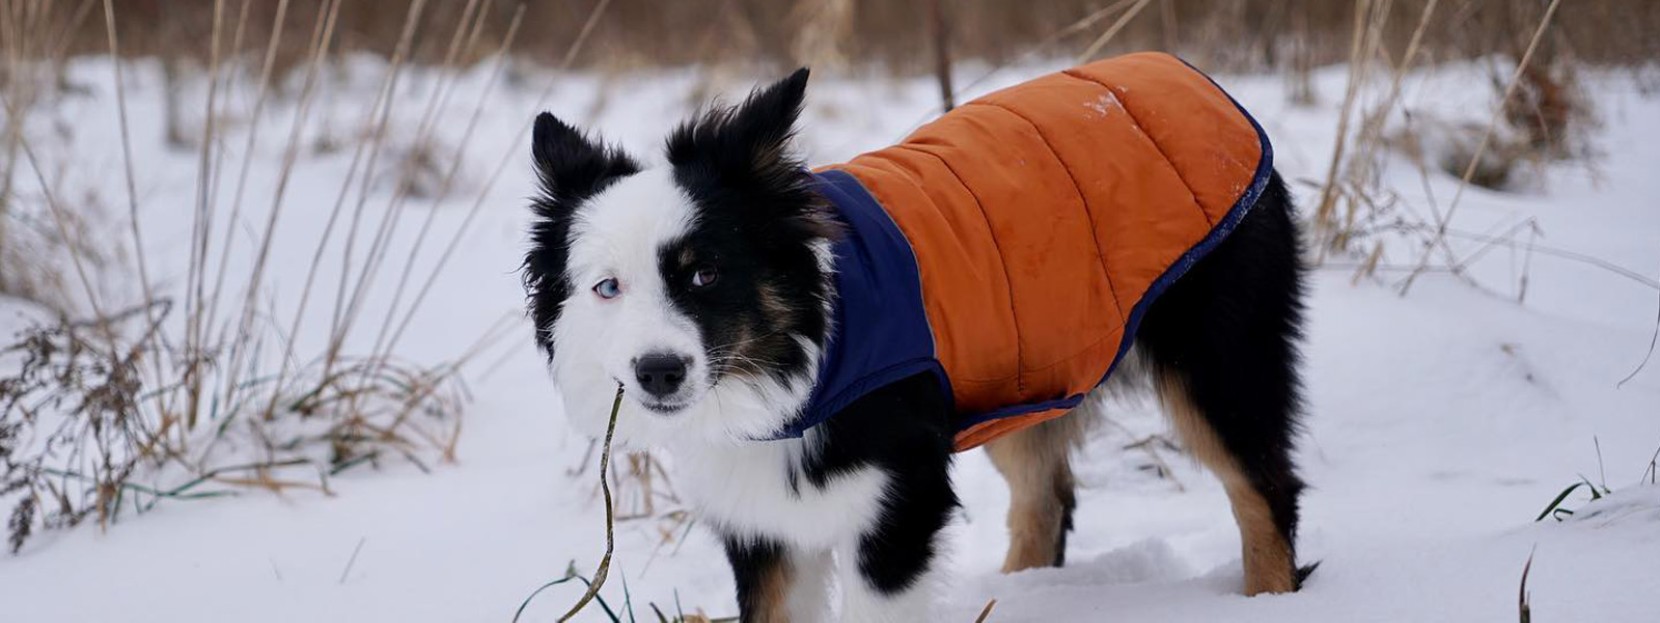 A black and white dog in an orange and blue dog jacket standing in a snowy field.